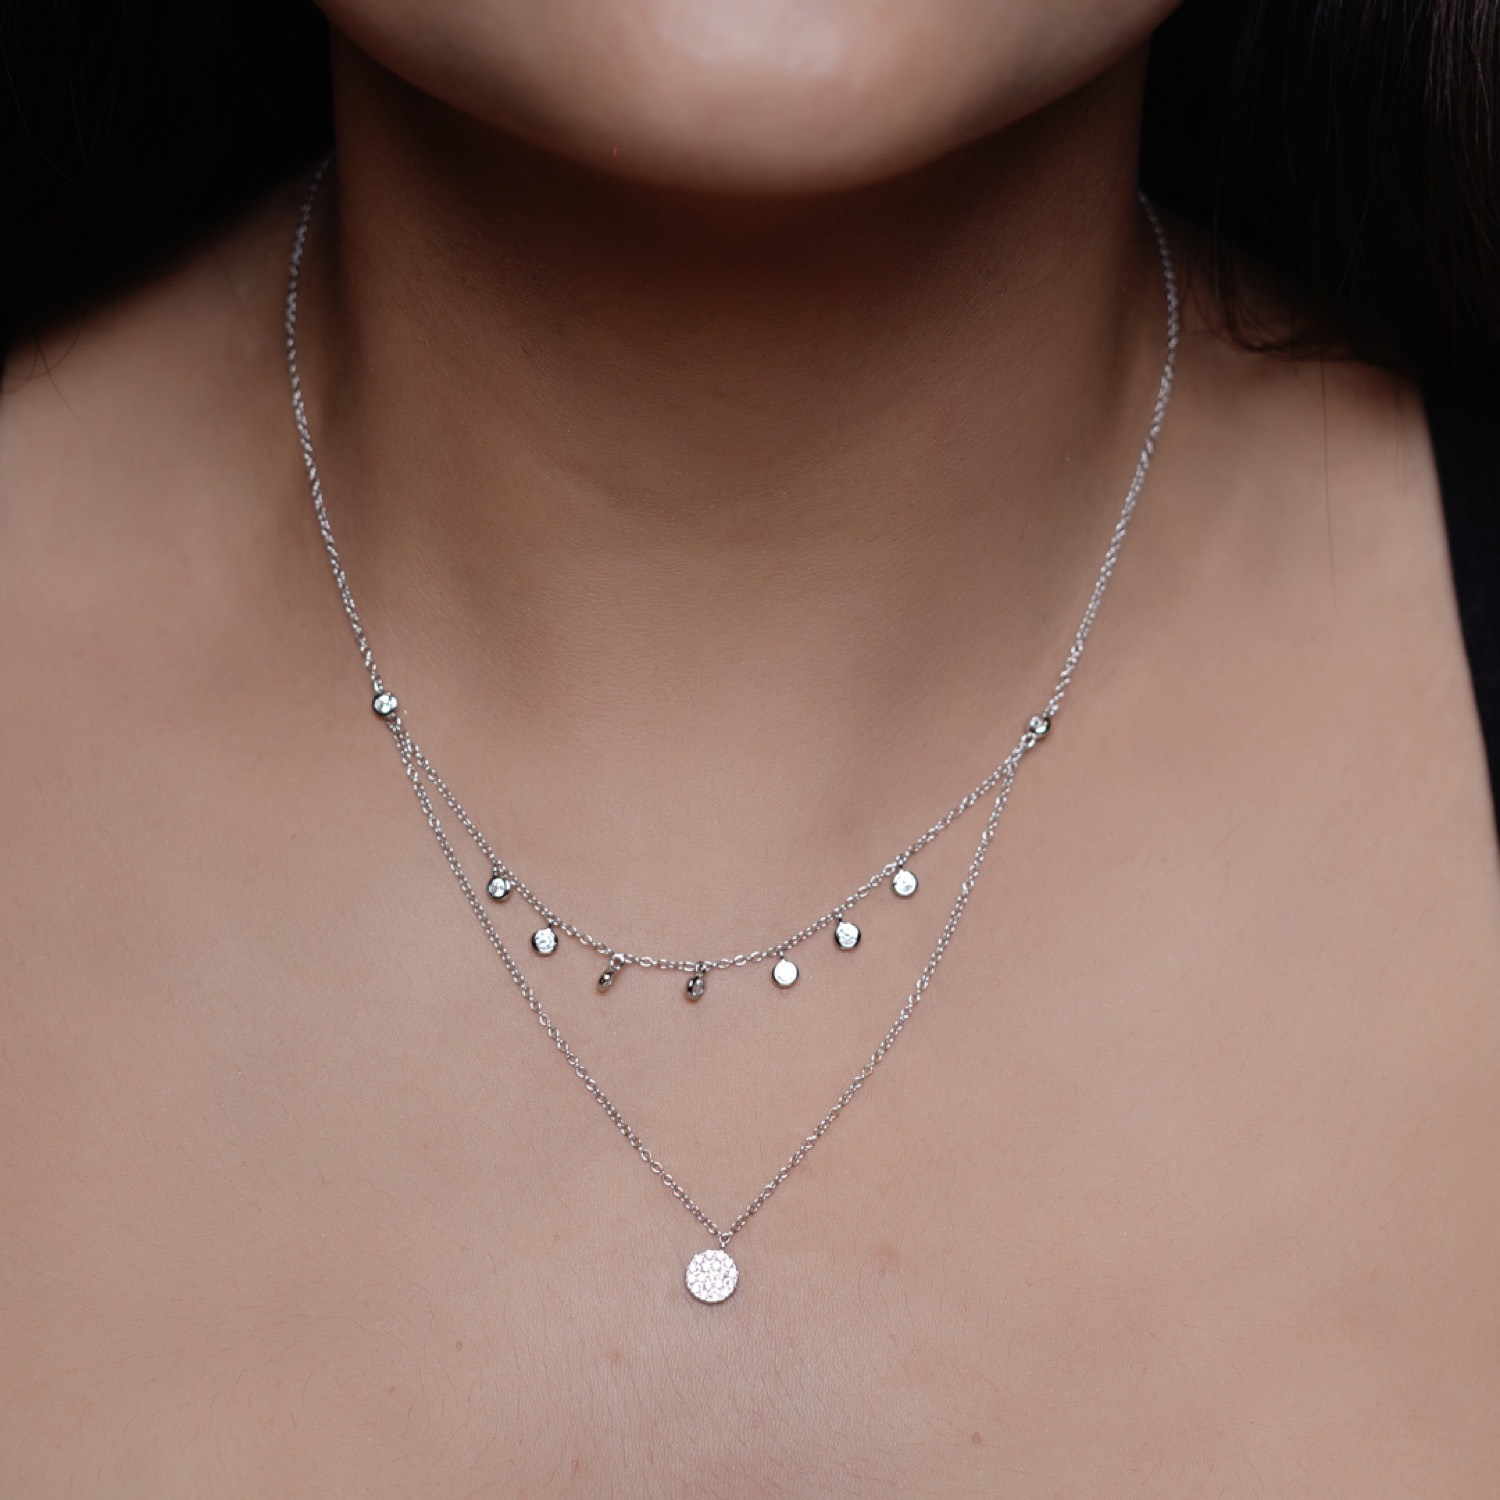 varam_chain_102022_double_layered_bezel_drop_and_round_shaped_white_stone_pendant_silver_chain-2